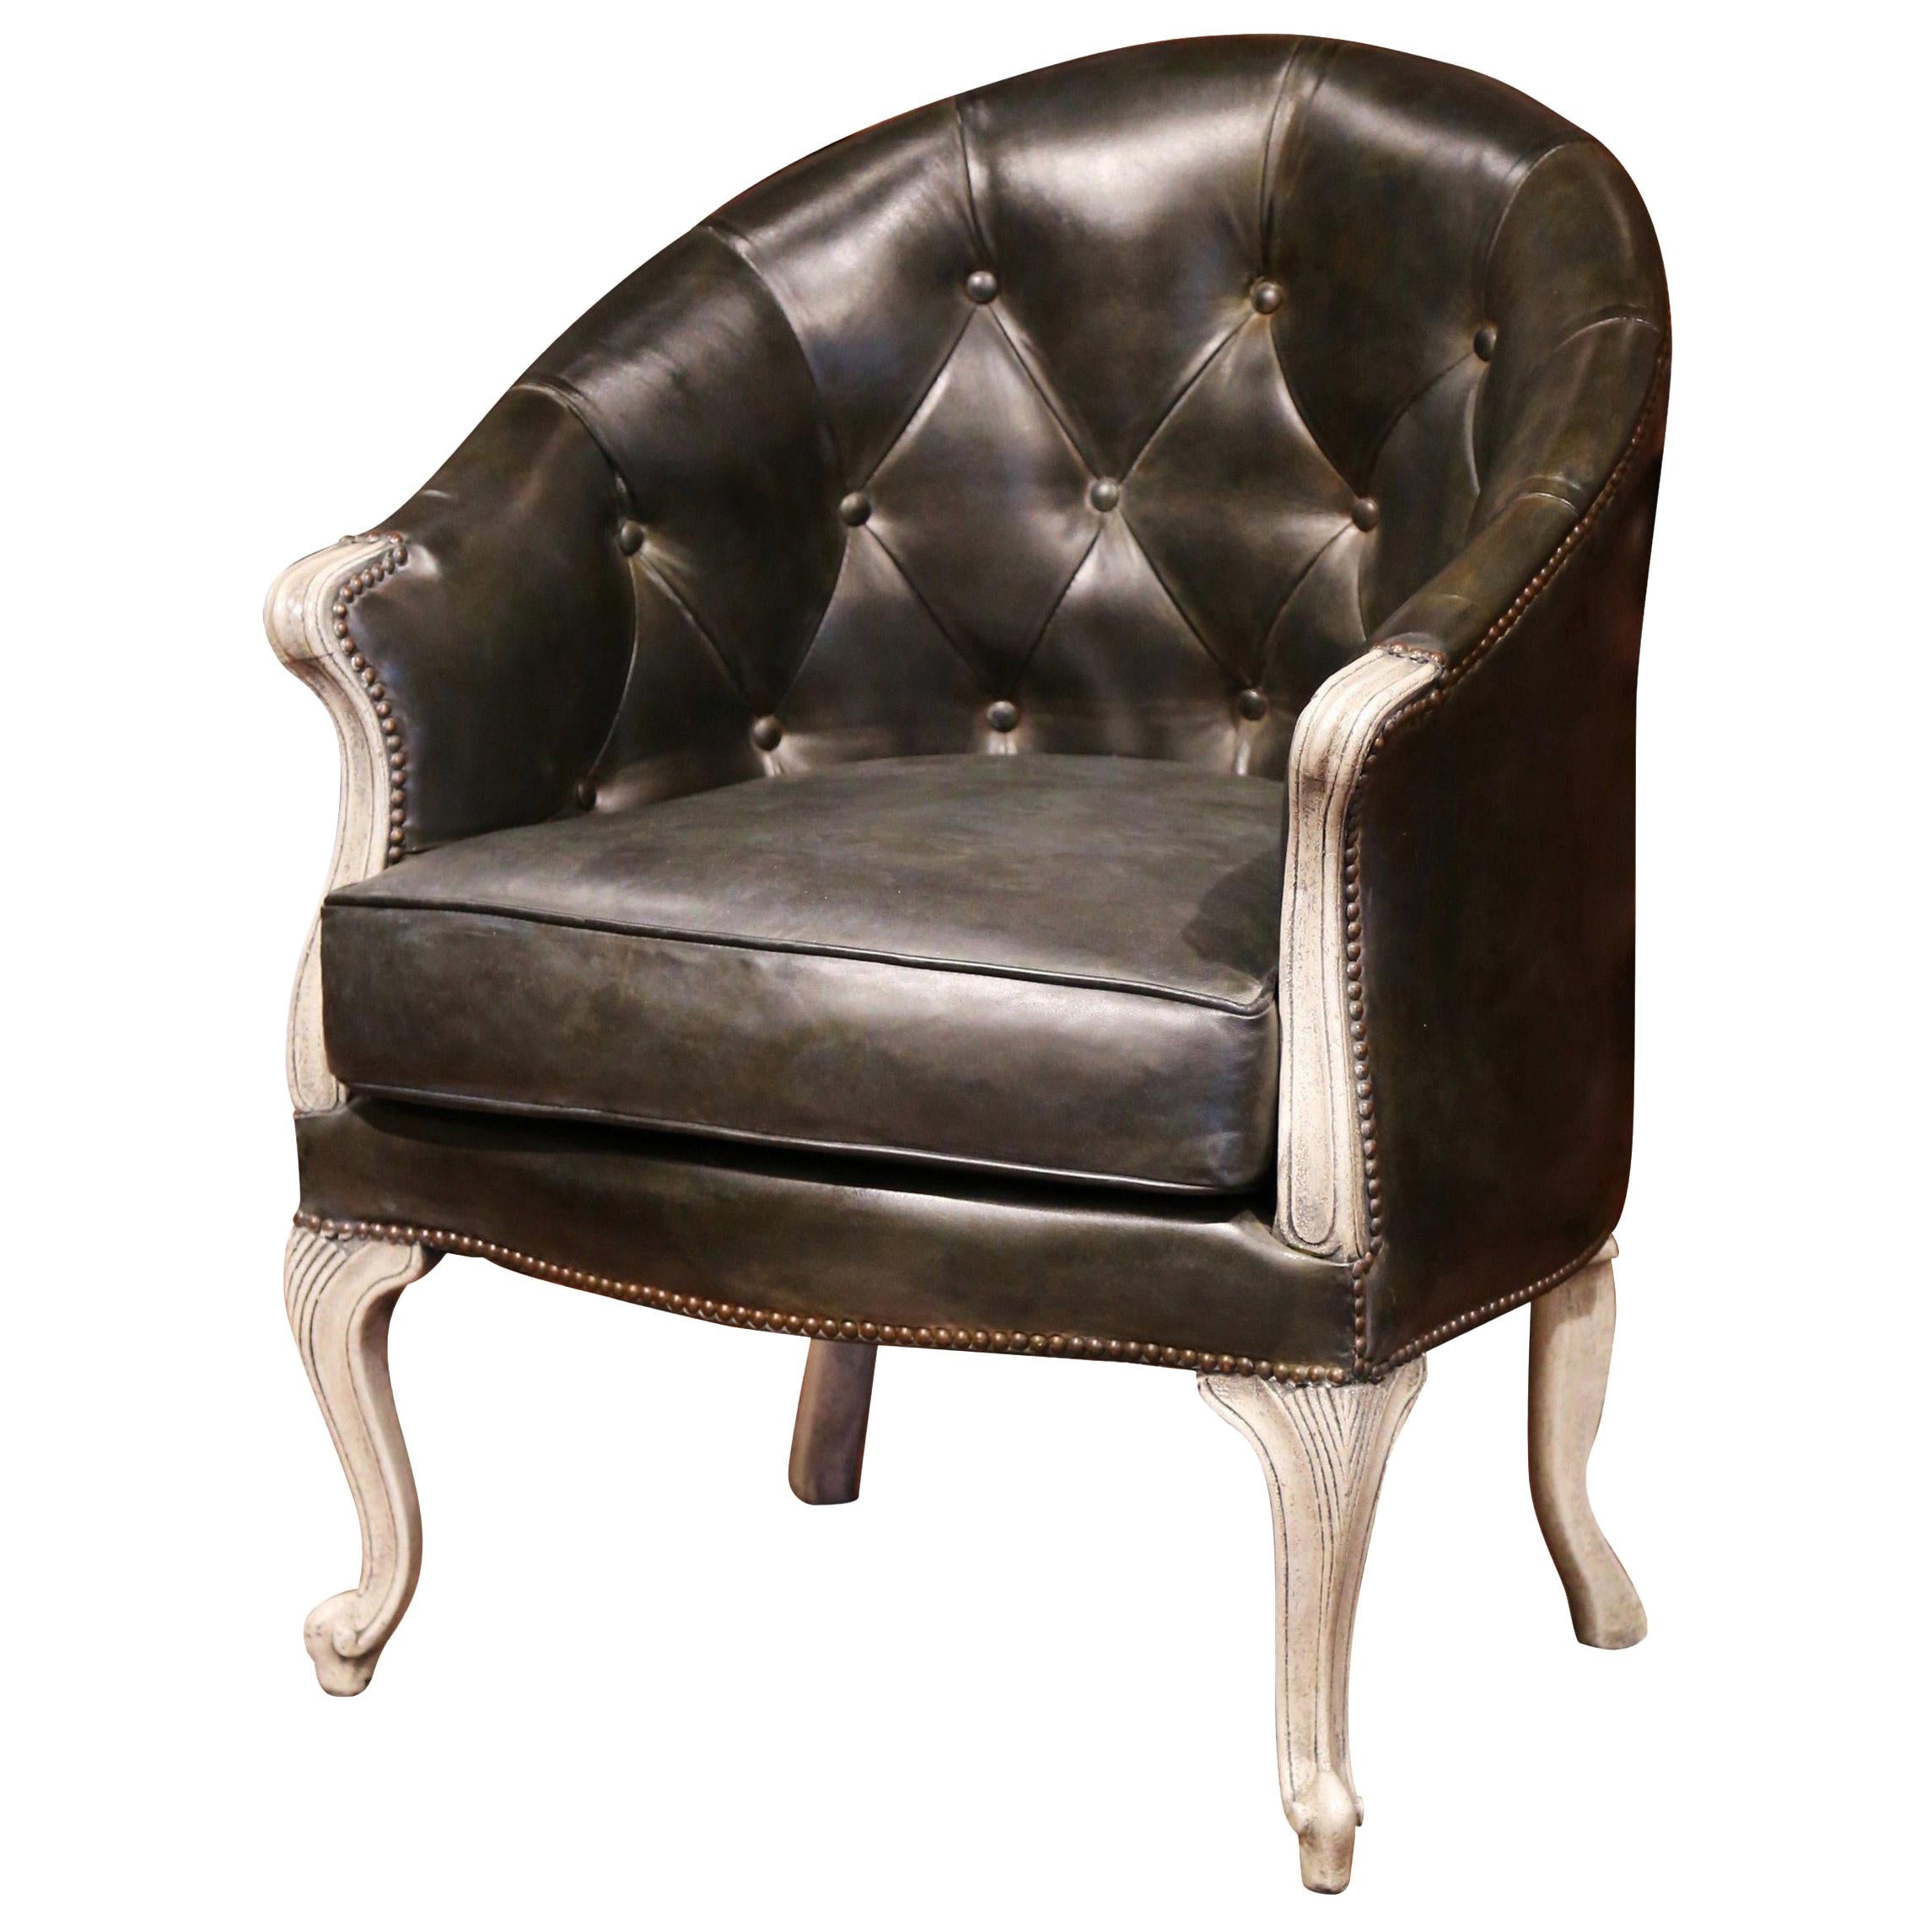 Complete your living room, study or office with this comfortable, Louis XV style armchair. Crafted in France circa 1870, the large chair stands on cabriole legs over a rounded, tapered back. The unique, accent chair is upholstered with a thick,